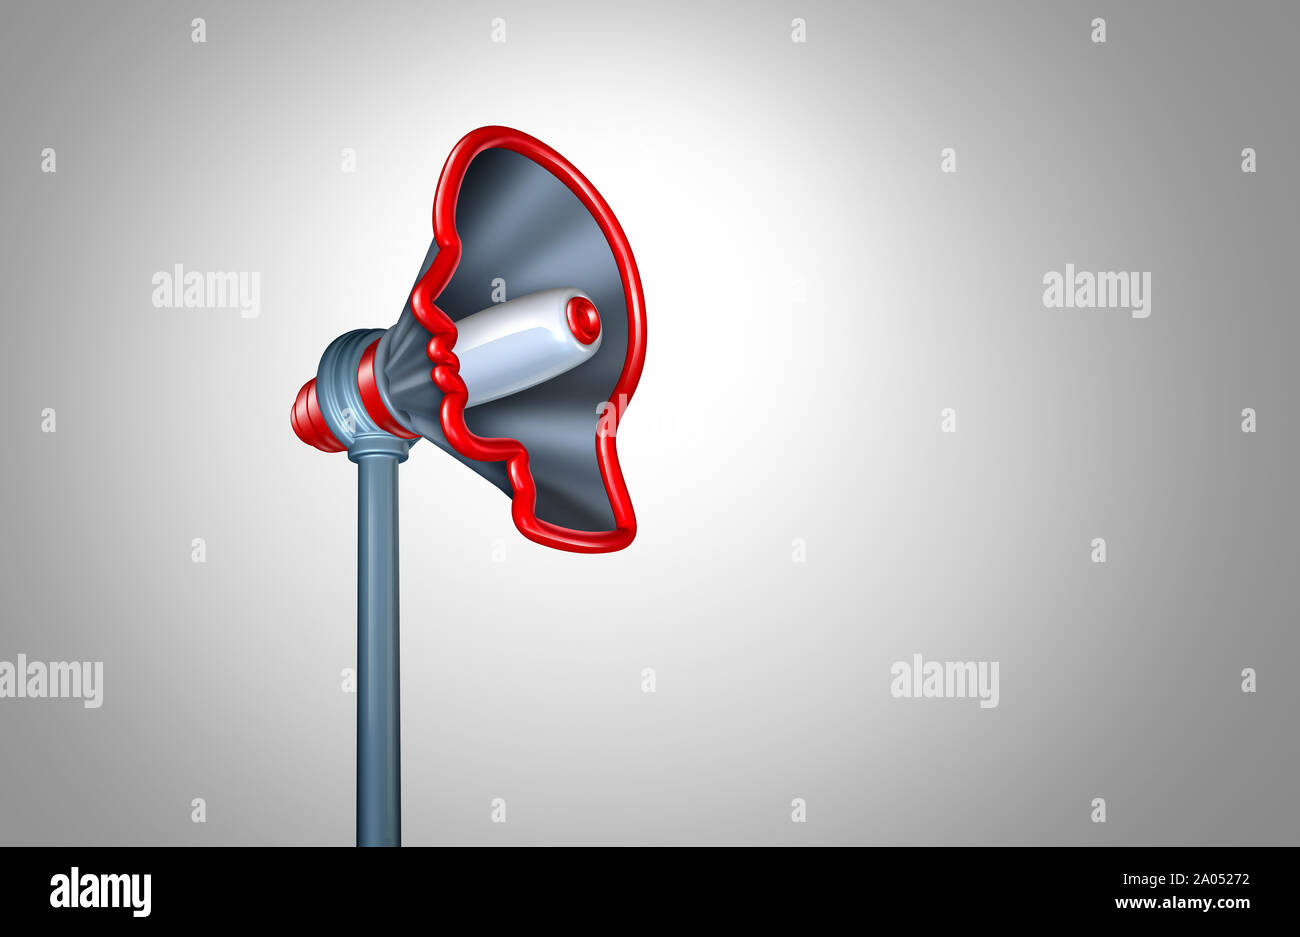 Social media influencer marketing and social promotion concept as a leading blogger or vlogger shaped as a megaphone or bullhorn influencing. Stock Photo